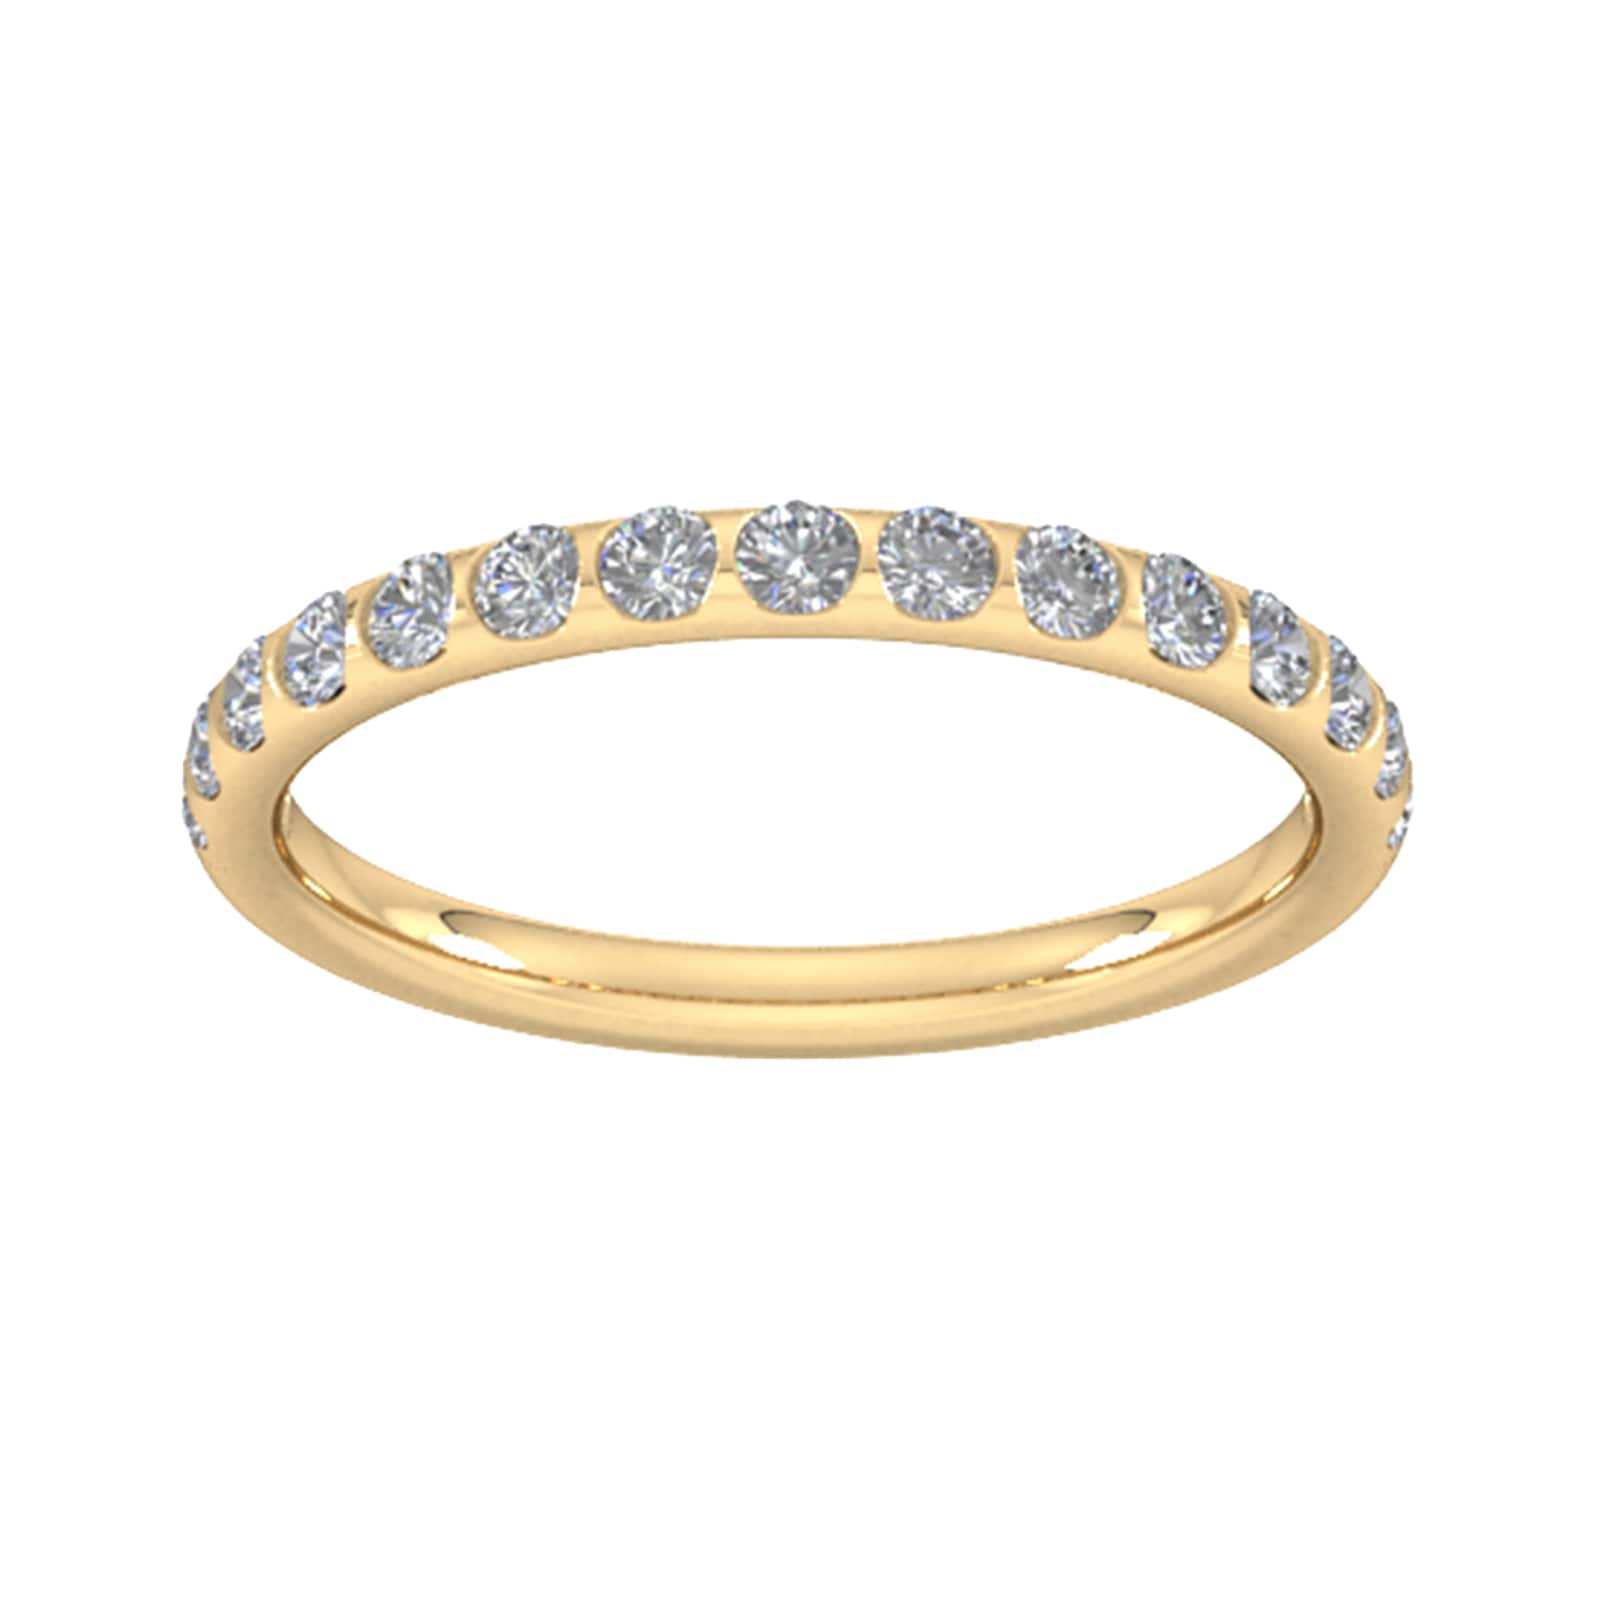 0.53 Carat Total Weight Curved Bar Brilliant Cut Diamond Set Wedding Ring In 18 Carat Yellow Gold - Ring Size W